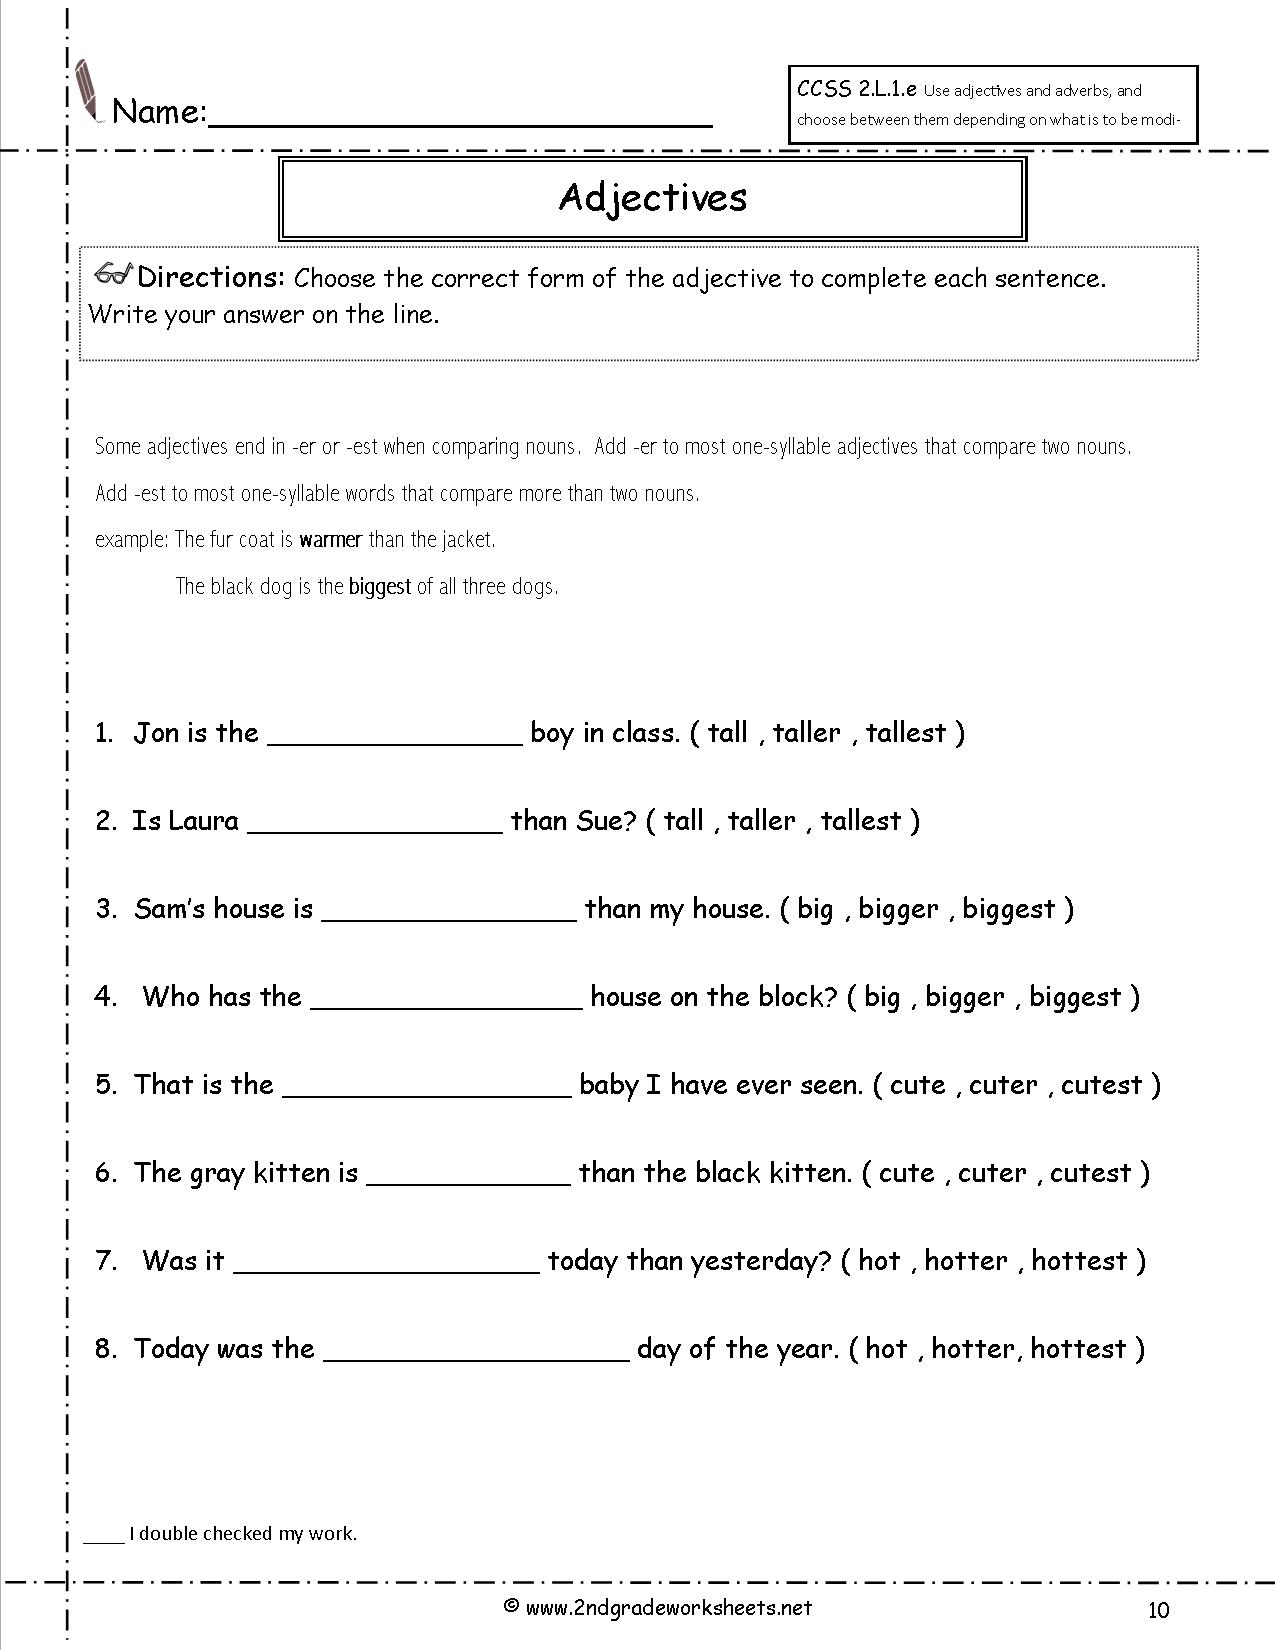 adjective-and-adverb-esl-worksheet-by-pinko2012